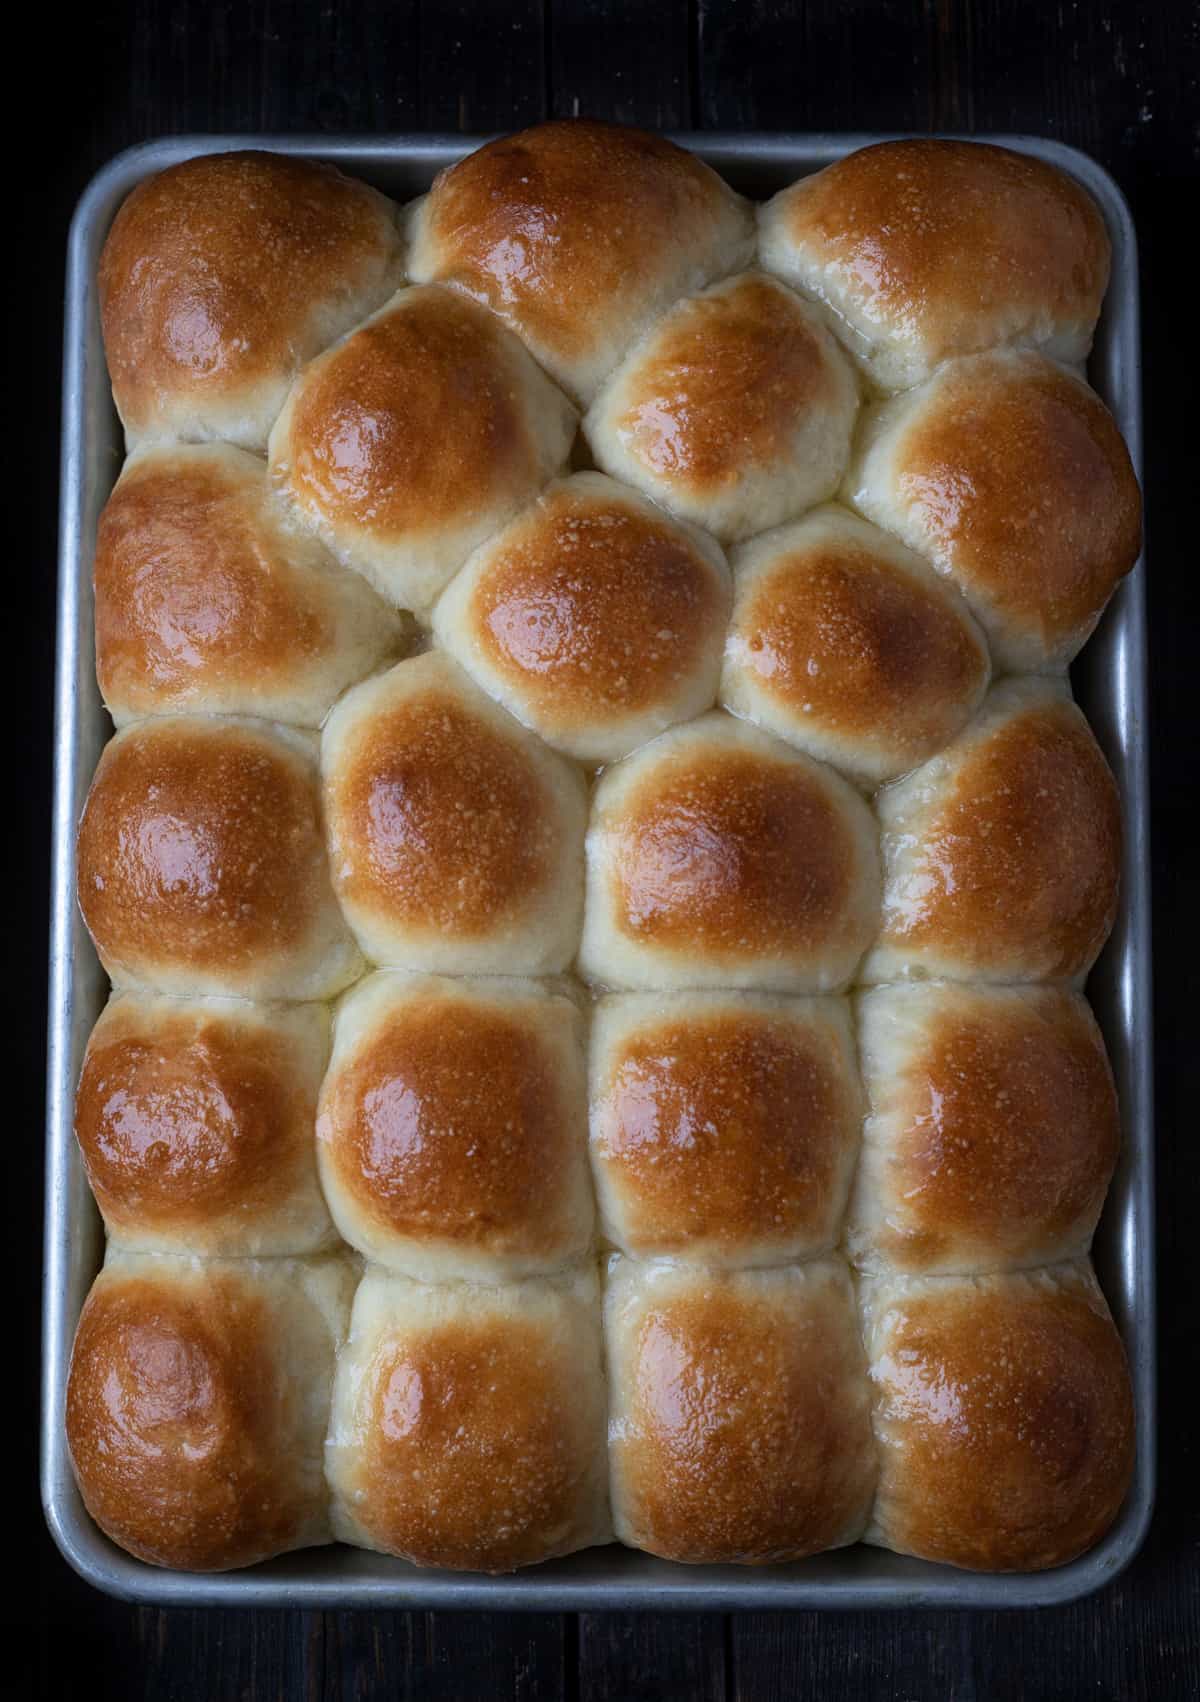 Tray full of freshly baked dairy-free yeast rolls with buttery golden tops.